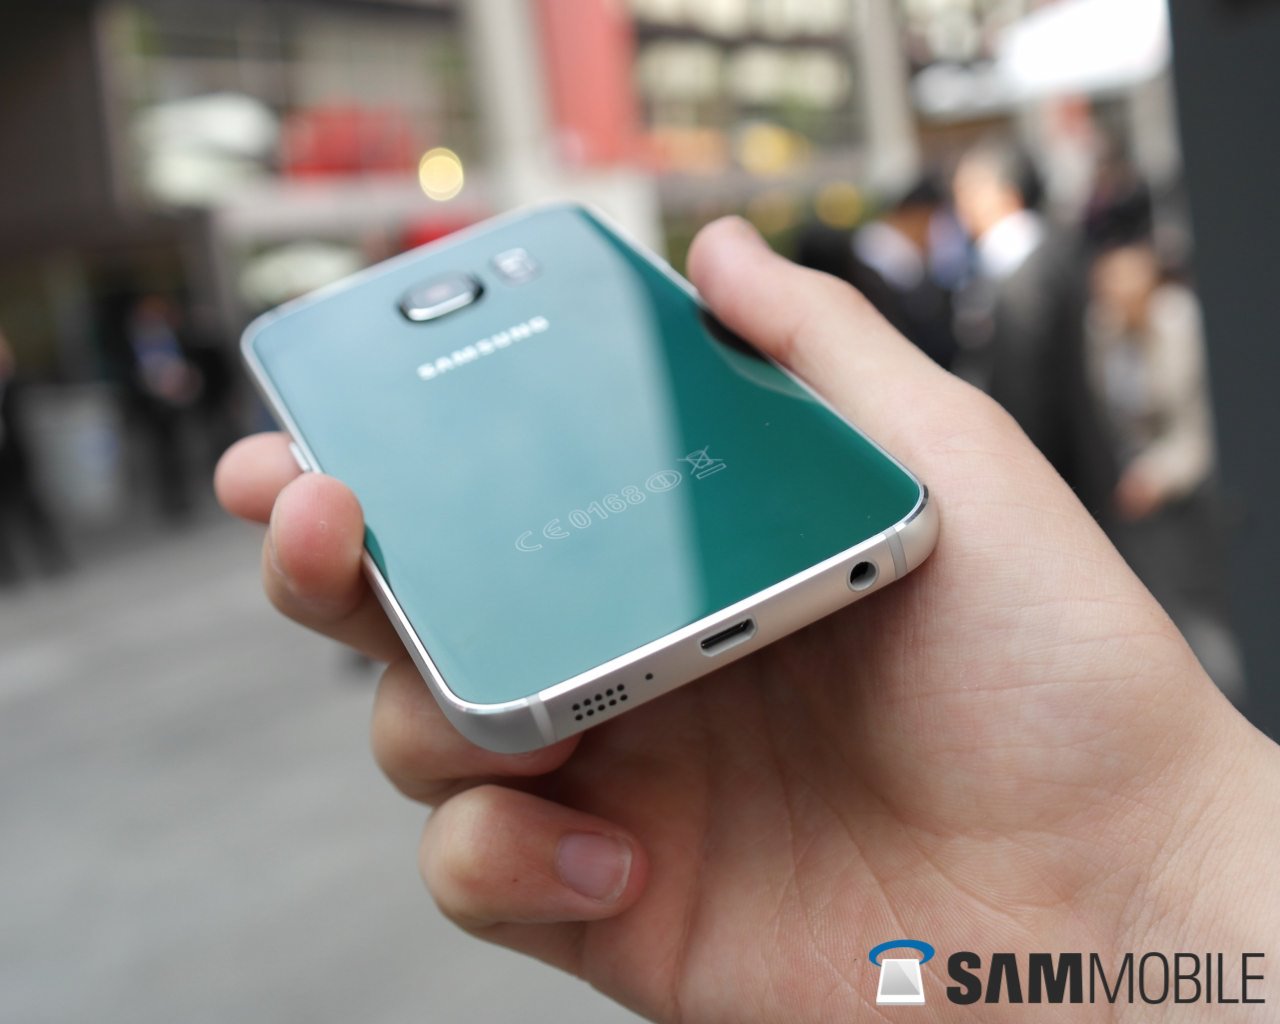 Samsung Galaxy S23 price starts at $800, leaked document shows - SamMobile